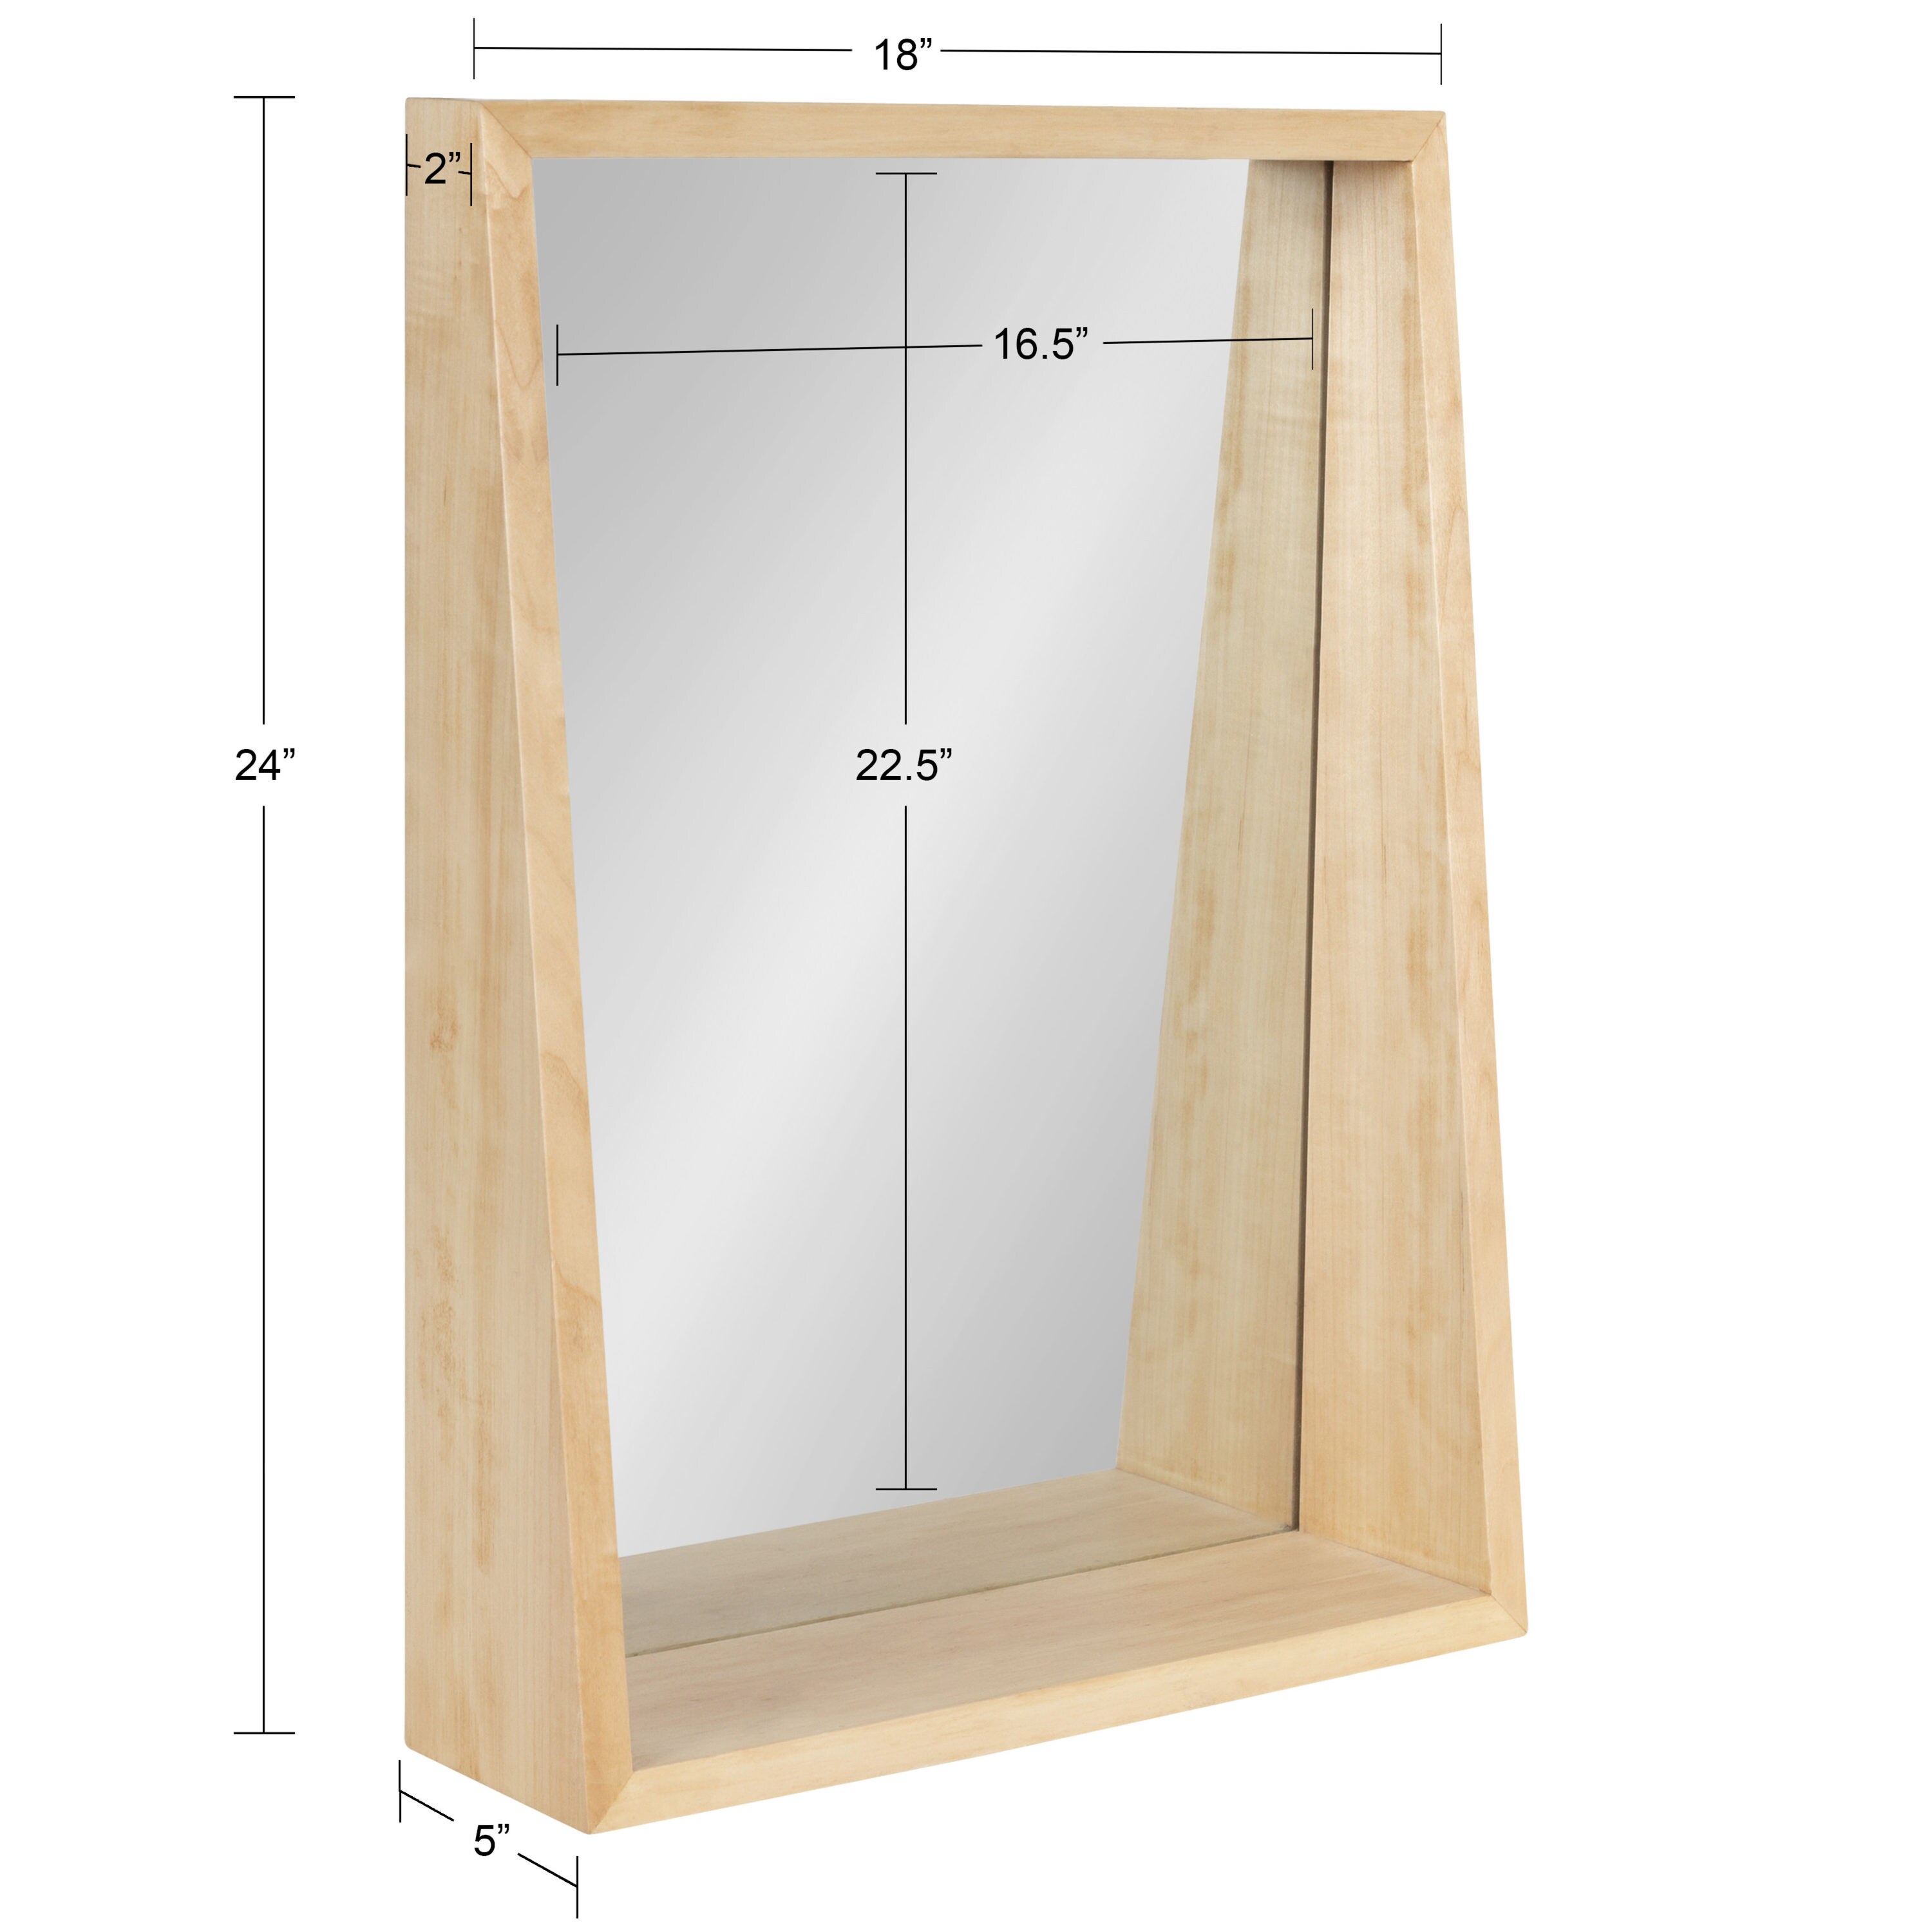 24 inch Portable Natural Pine Wood Countertop Display Case 24"W x 24"L x 3"D 